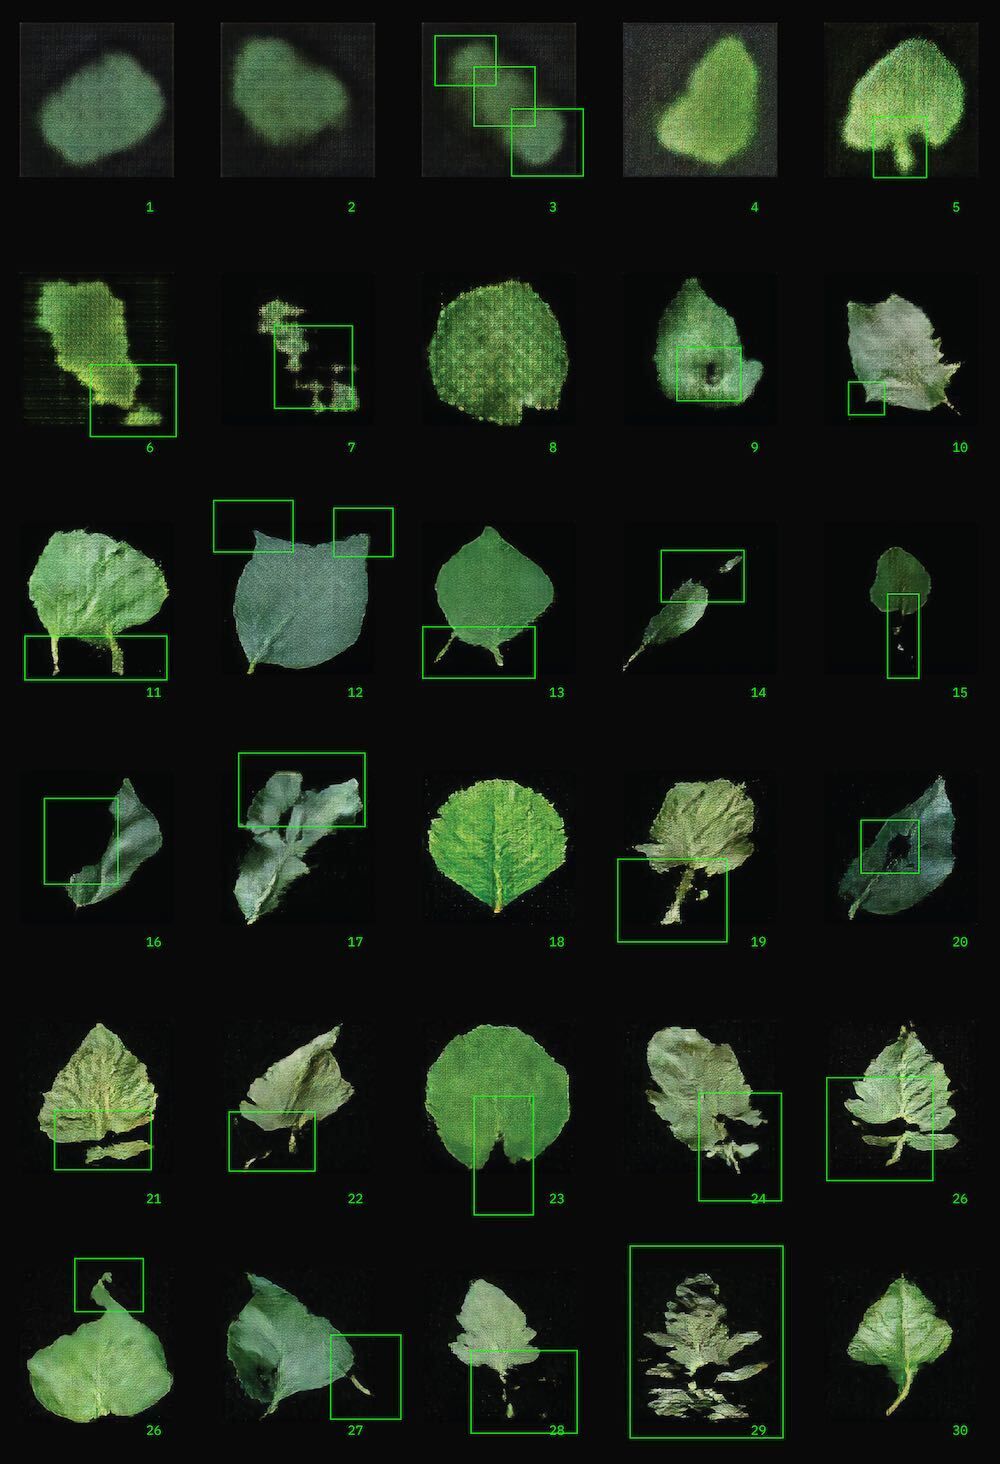 A grid of ML-generated leaves against a black background. Bright neon green squares highlight 'mistakes' in the leaves like holes or double stems.